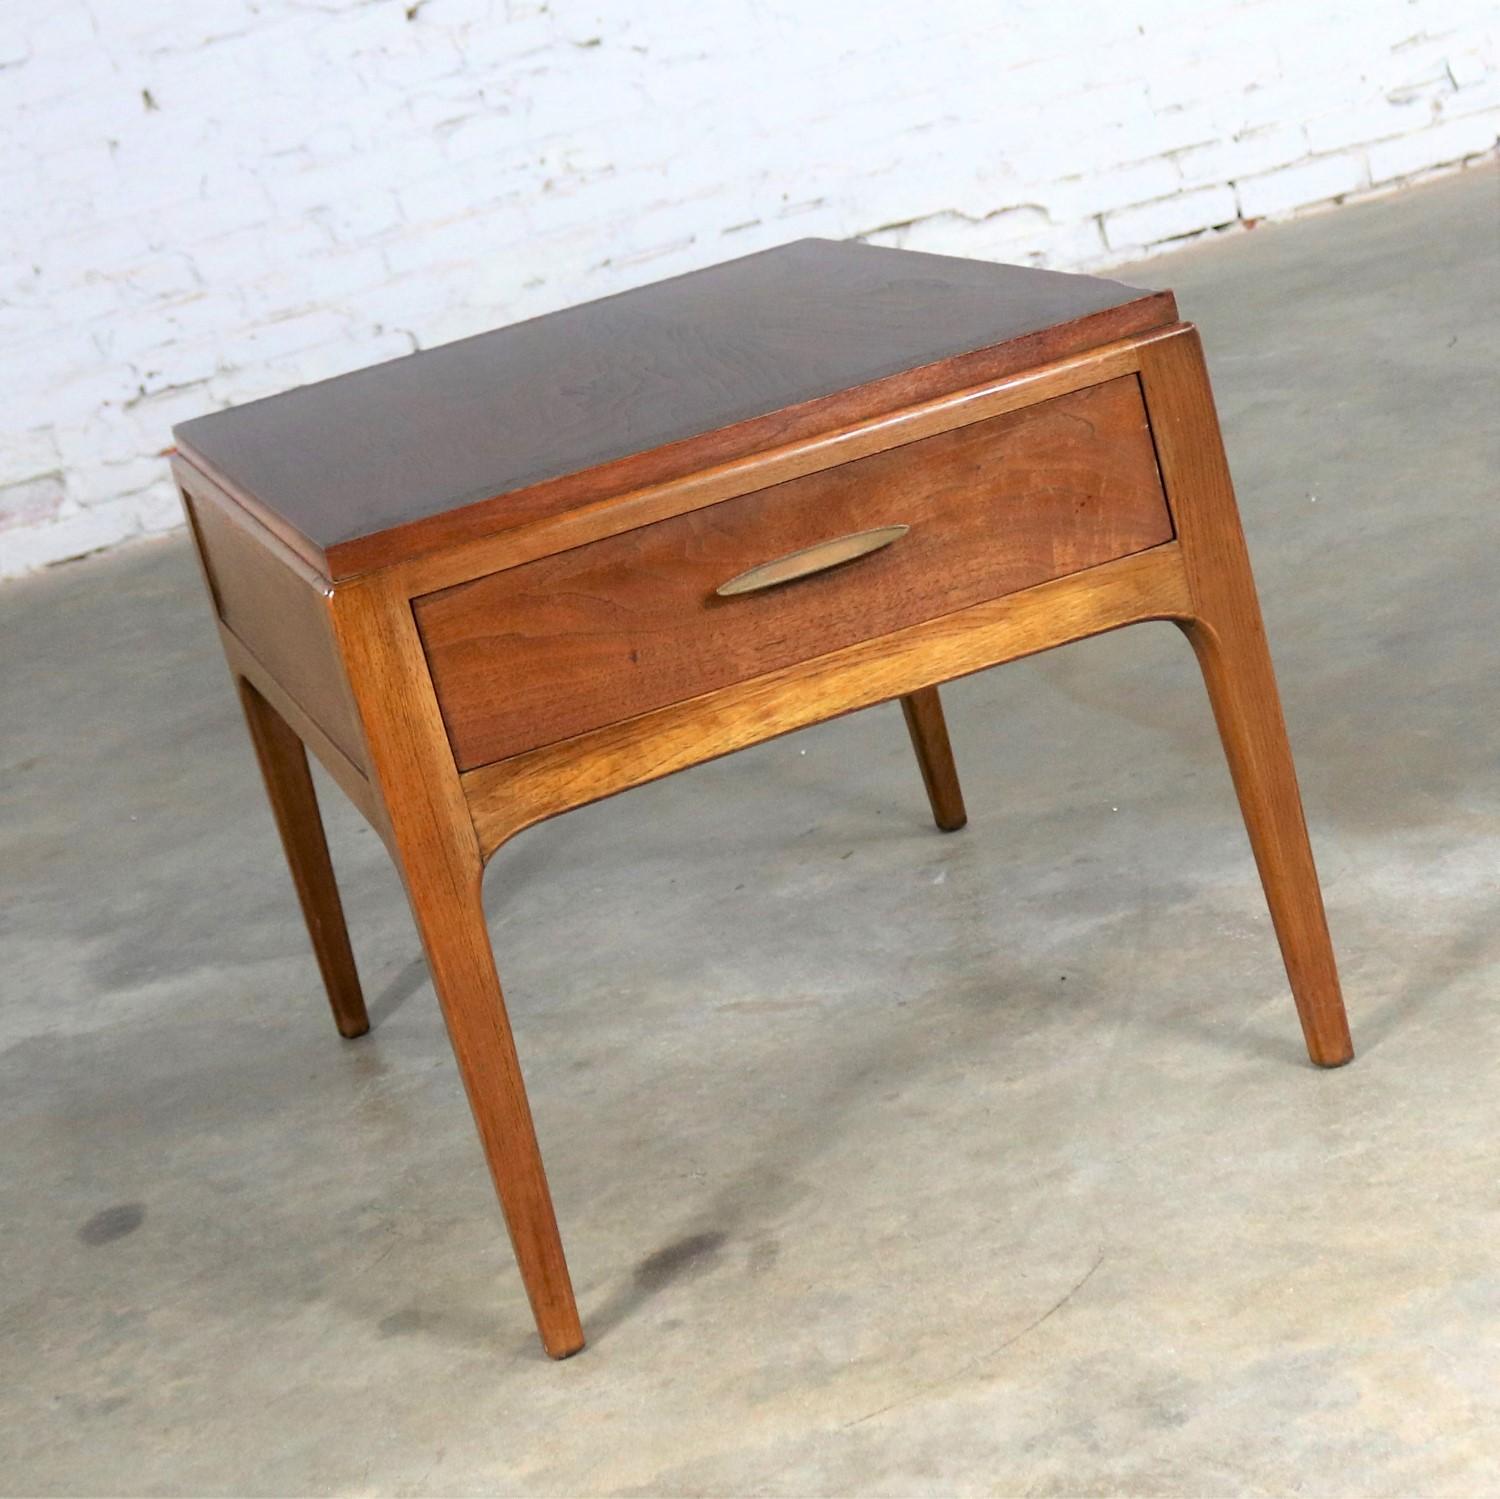 Iconic Mid-Century Modern walnut end table or side table by Lane Furniture for their Rhythm Collection. It is in wonderful vintage condition and ready to use. We have lightly sanded and restored the finish it to its beautiful original look, circa